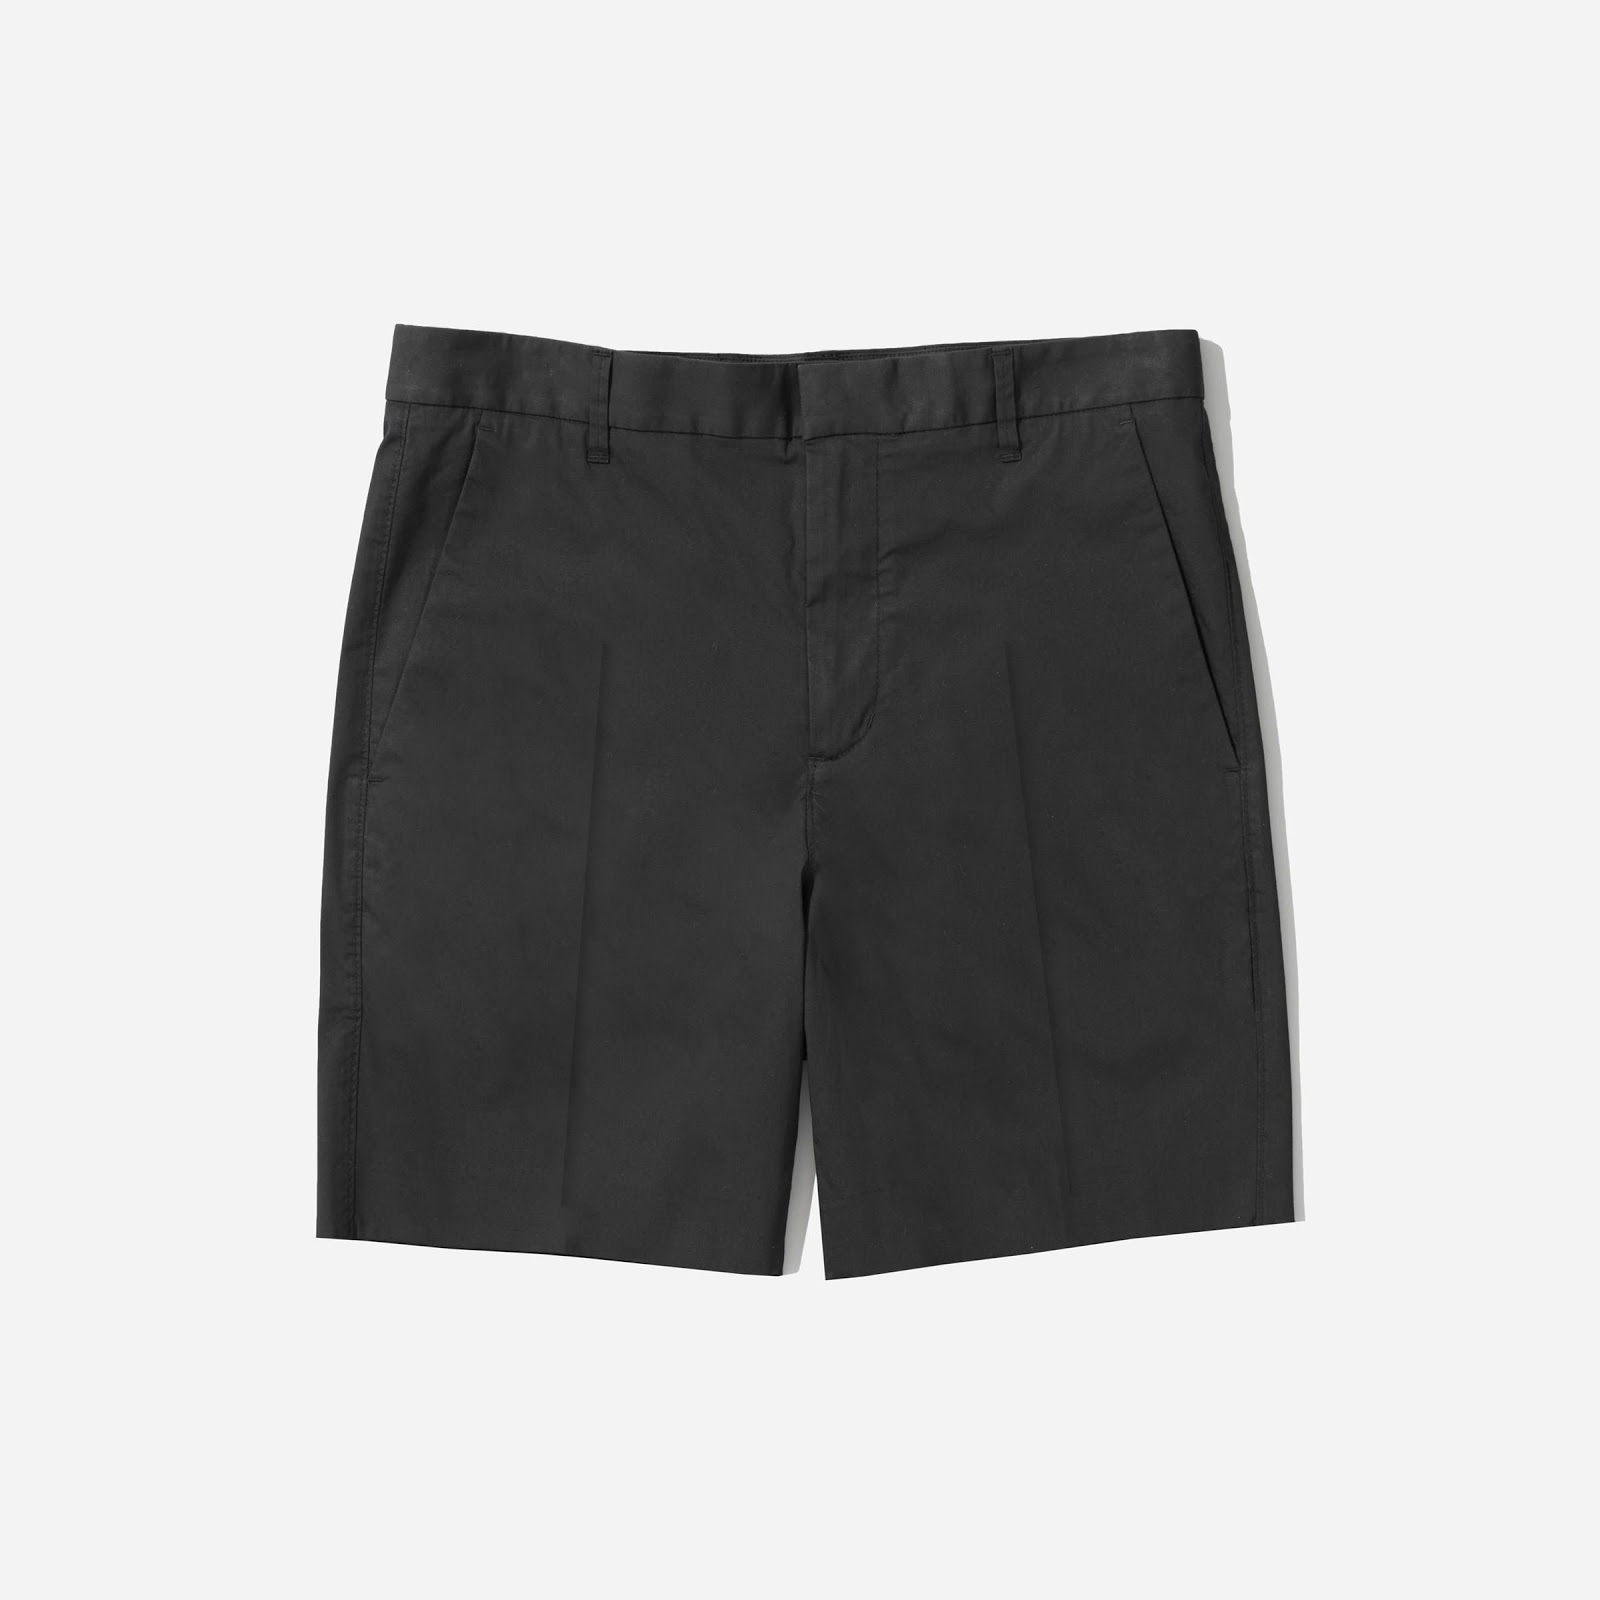 ABOUT SHORTS, SHORT TROUSERS, BOXER SHORTS OR SHORT NICKERS.